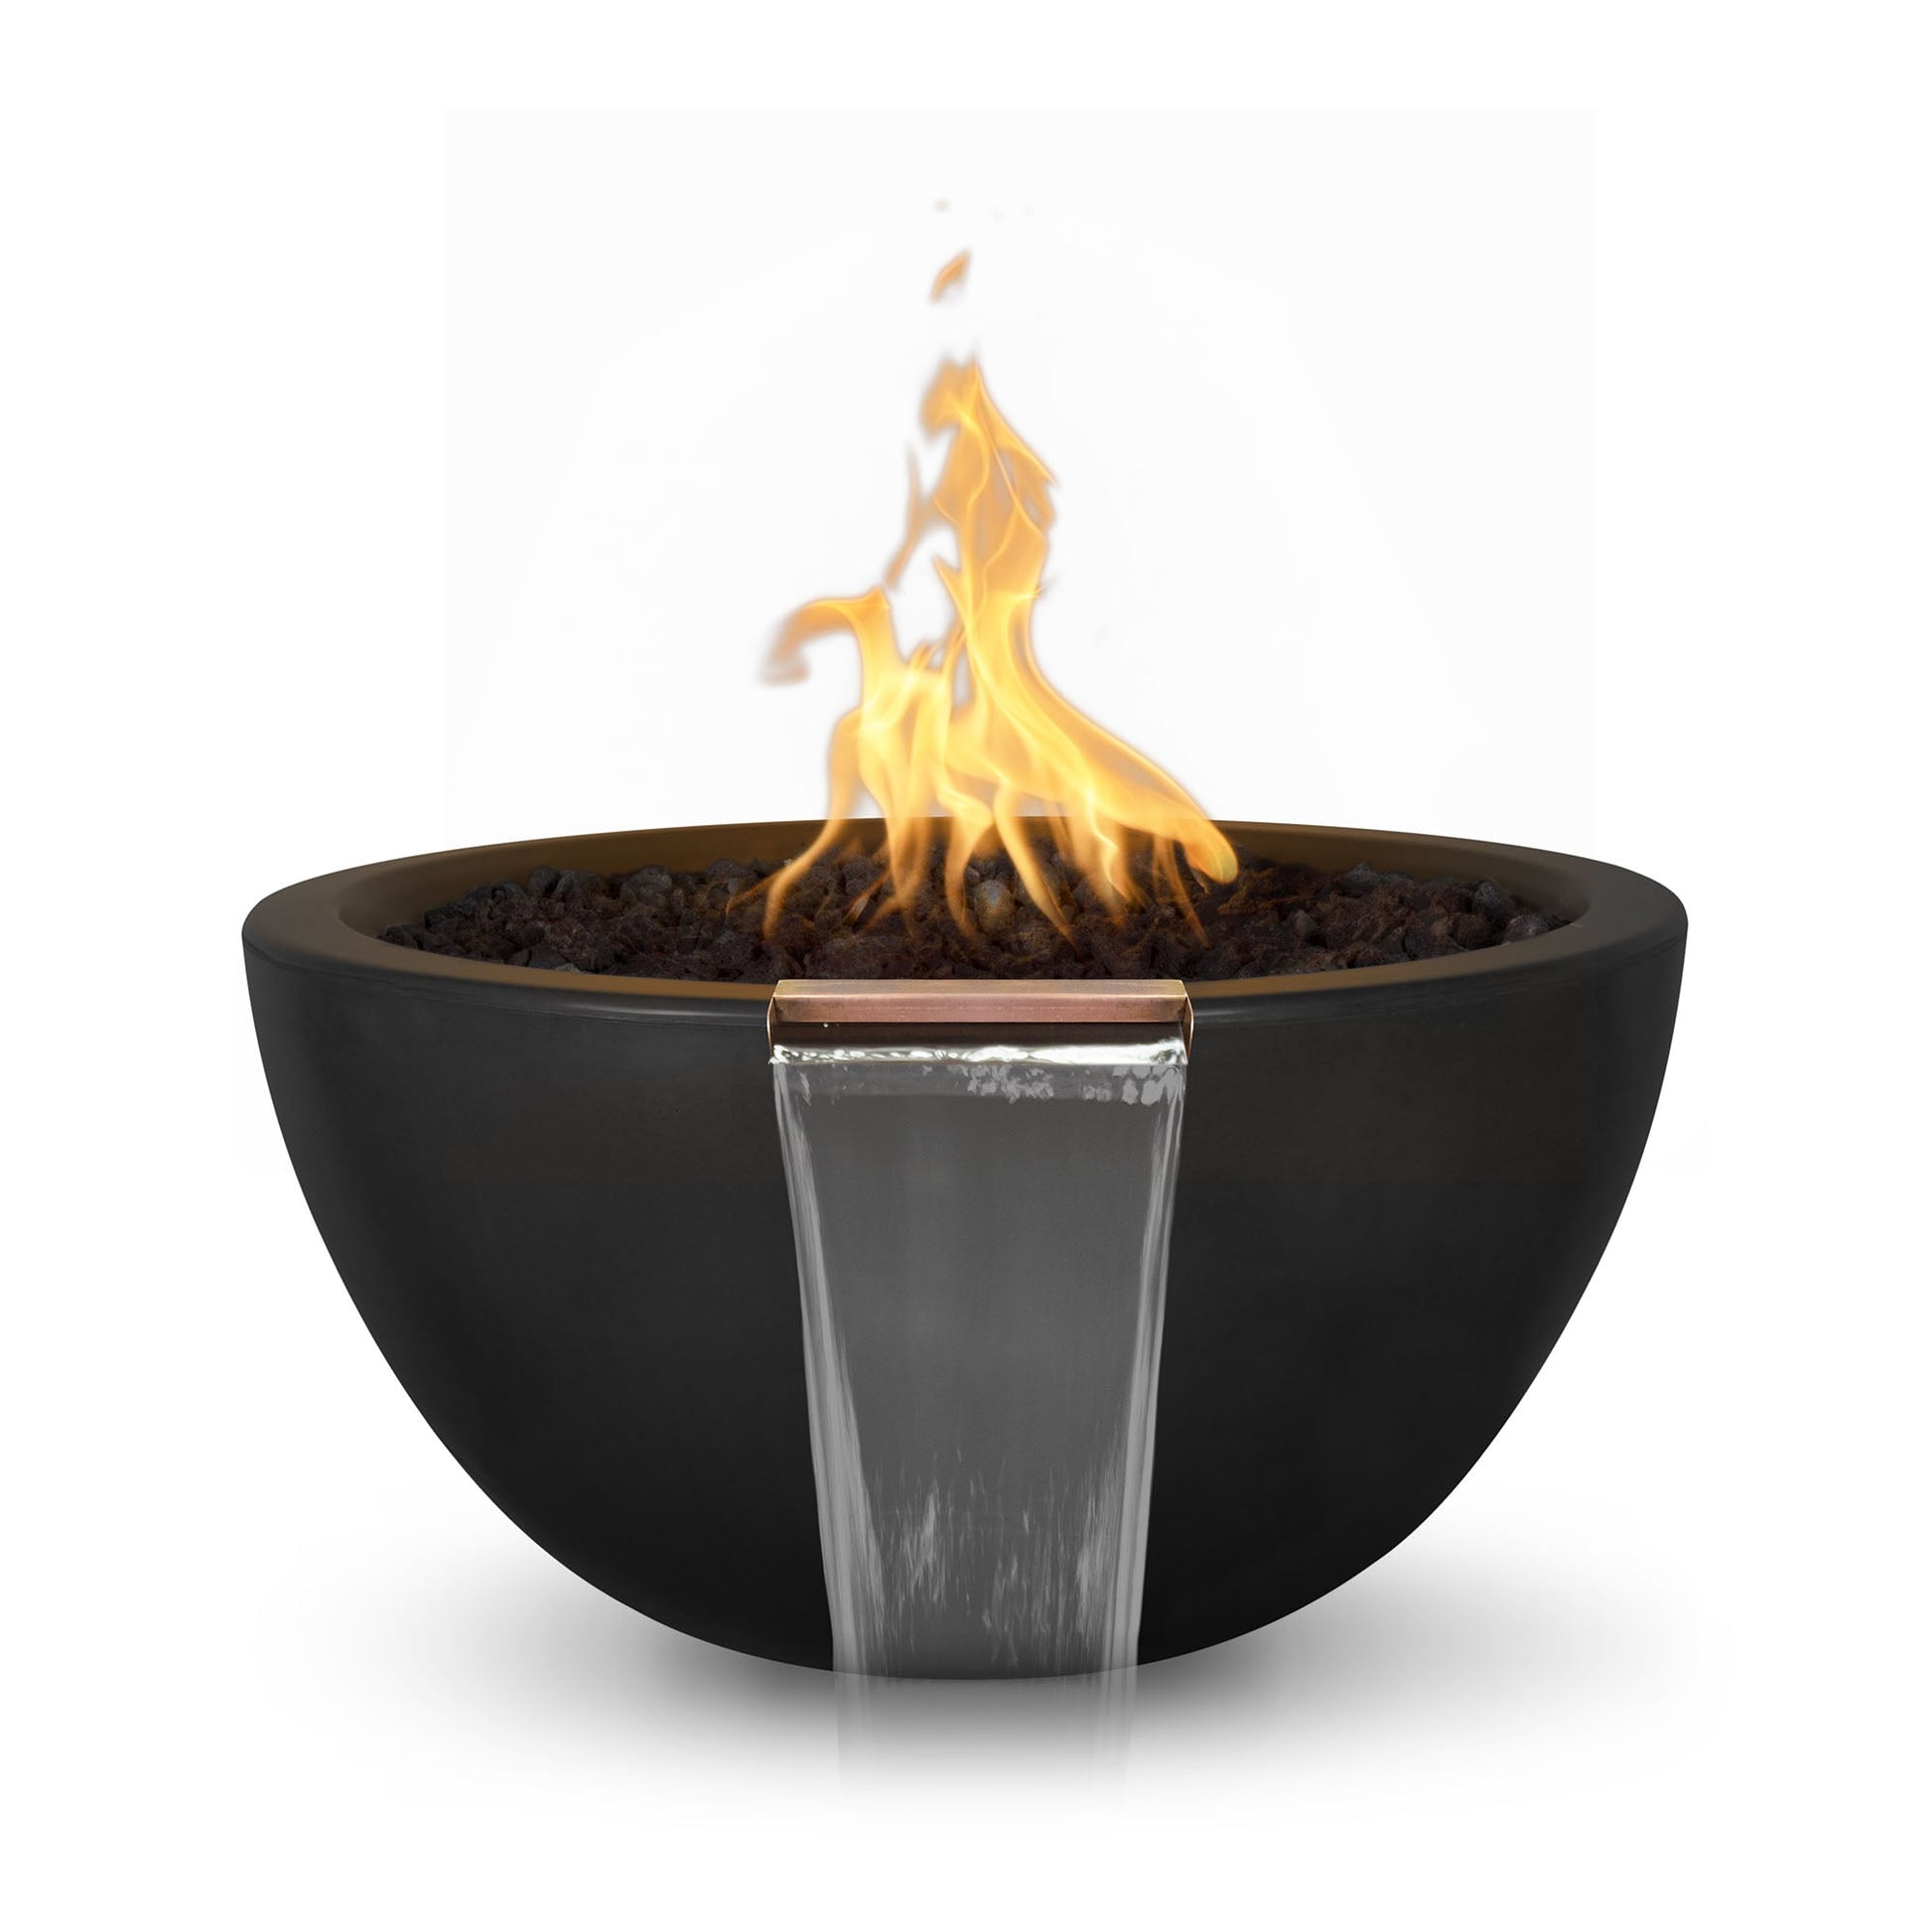 The Outdoor Plus Round Luna 30" Chocolate GFRC Concrete Natural Gas Fire & Water Bowl with Match Lit with Flame Sense Ignition